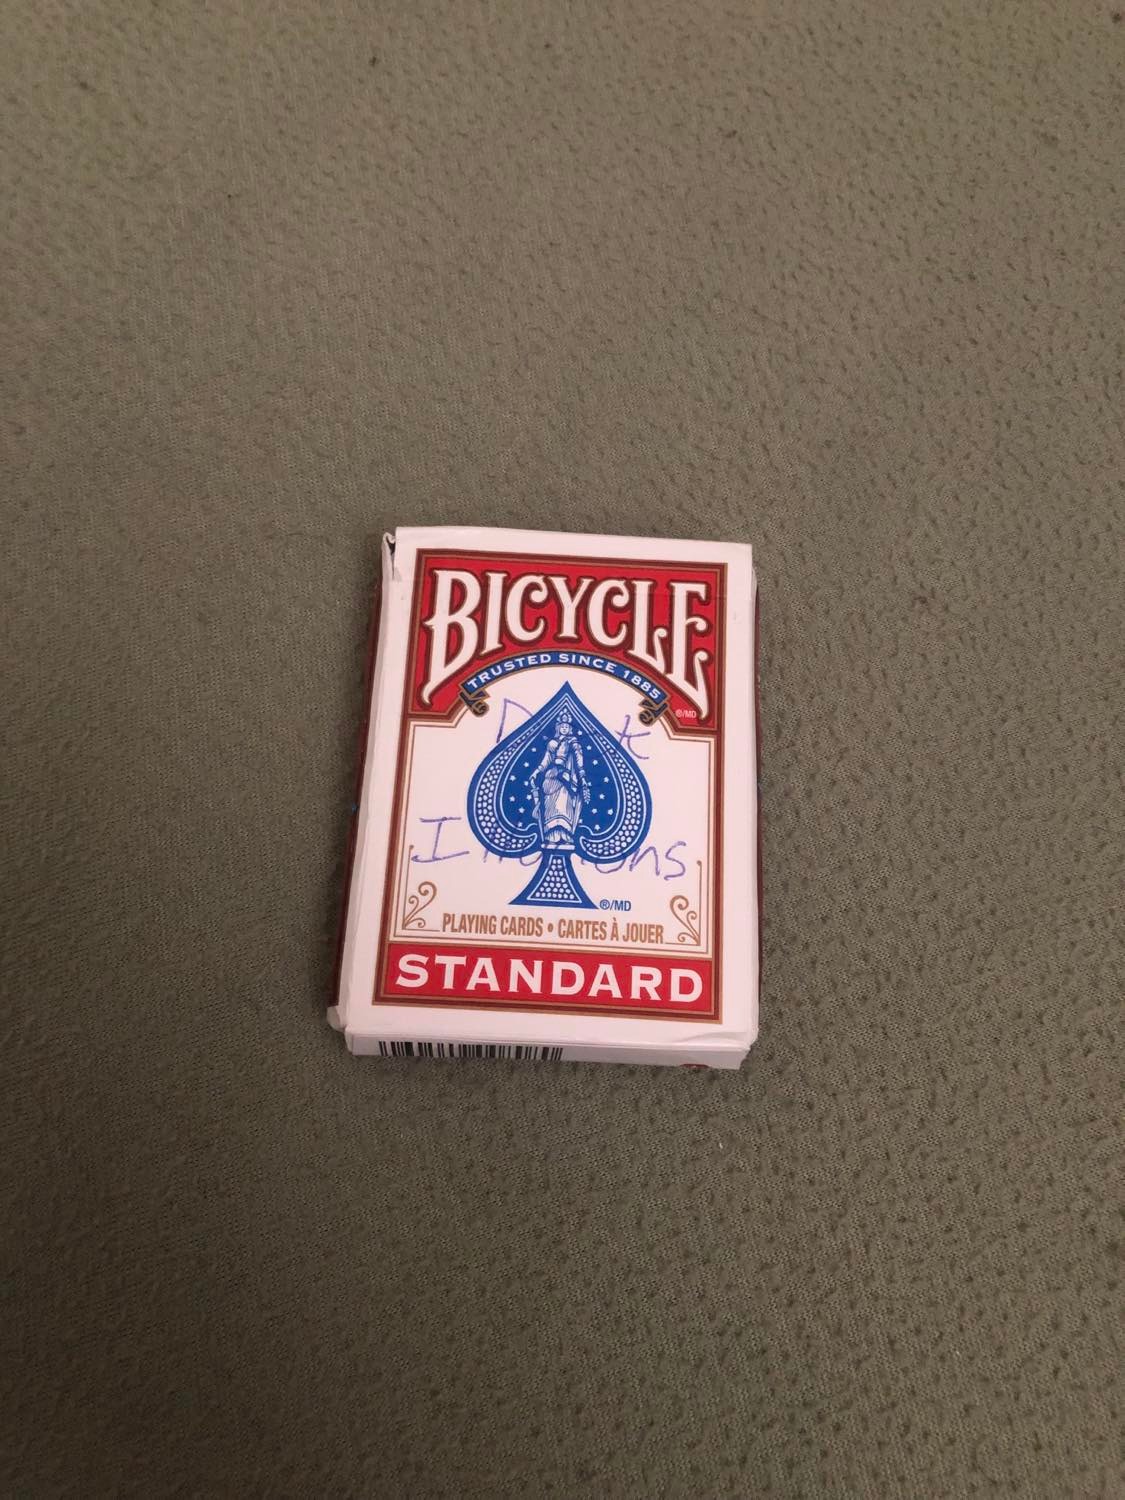 A deck of bicycle cards, with Deck of Illusions written on the front, on a beige surface.